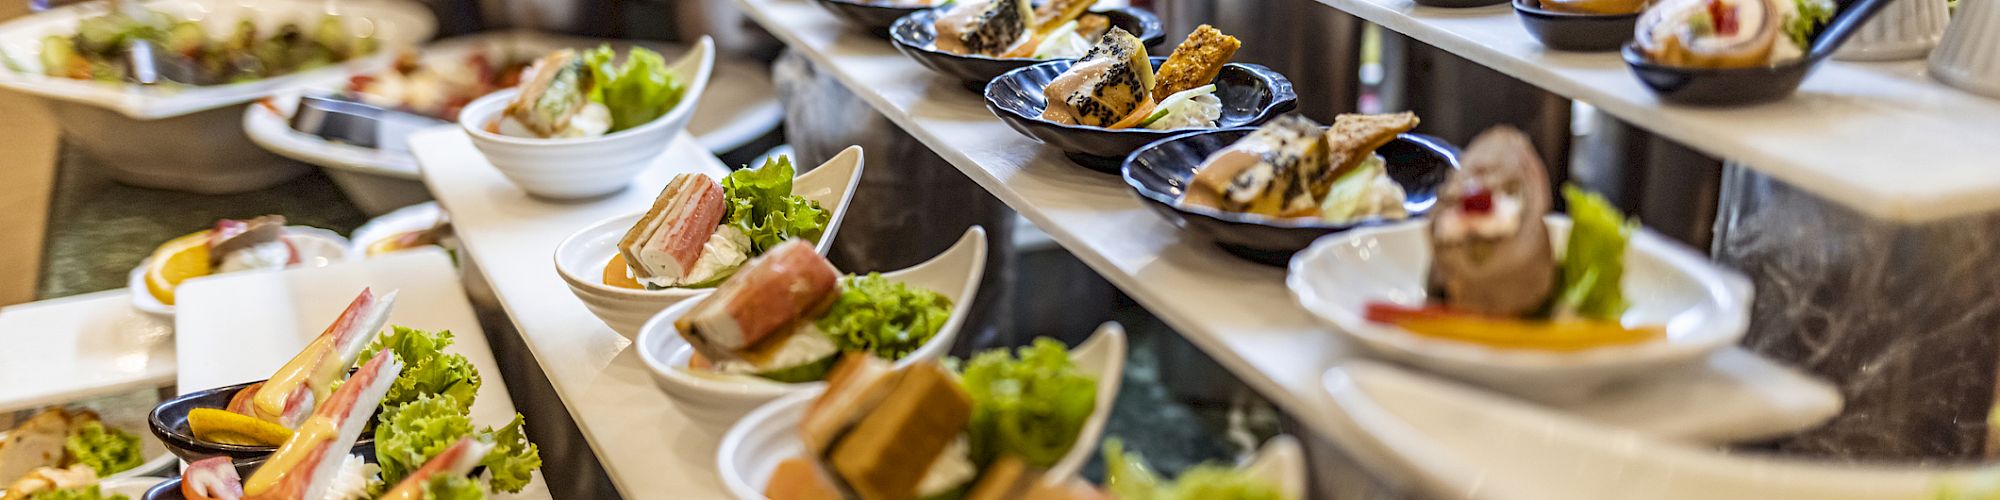 Buffet spread with a variety of neatly plated appetizers.